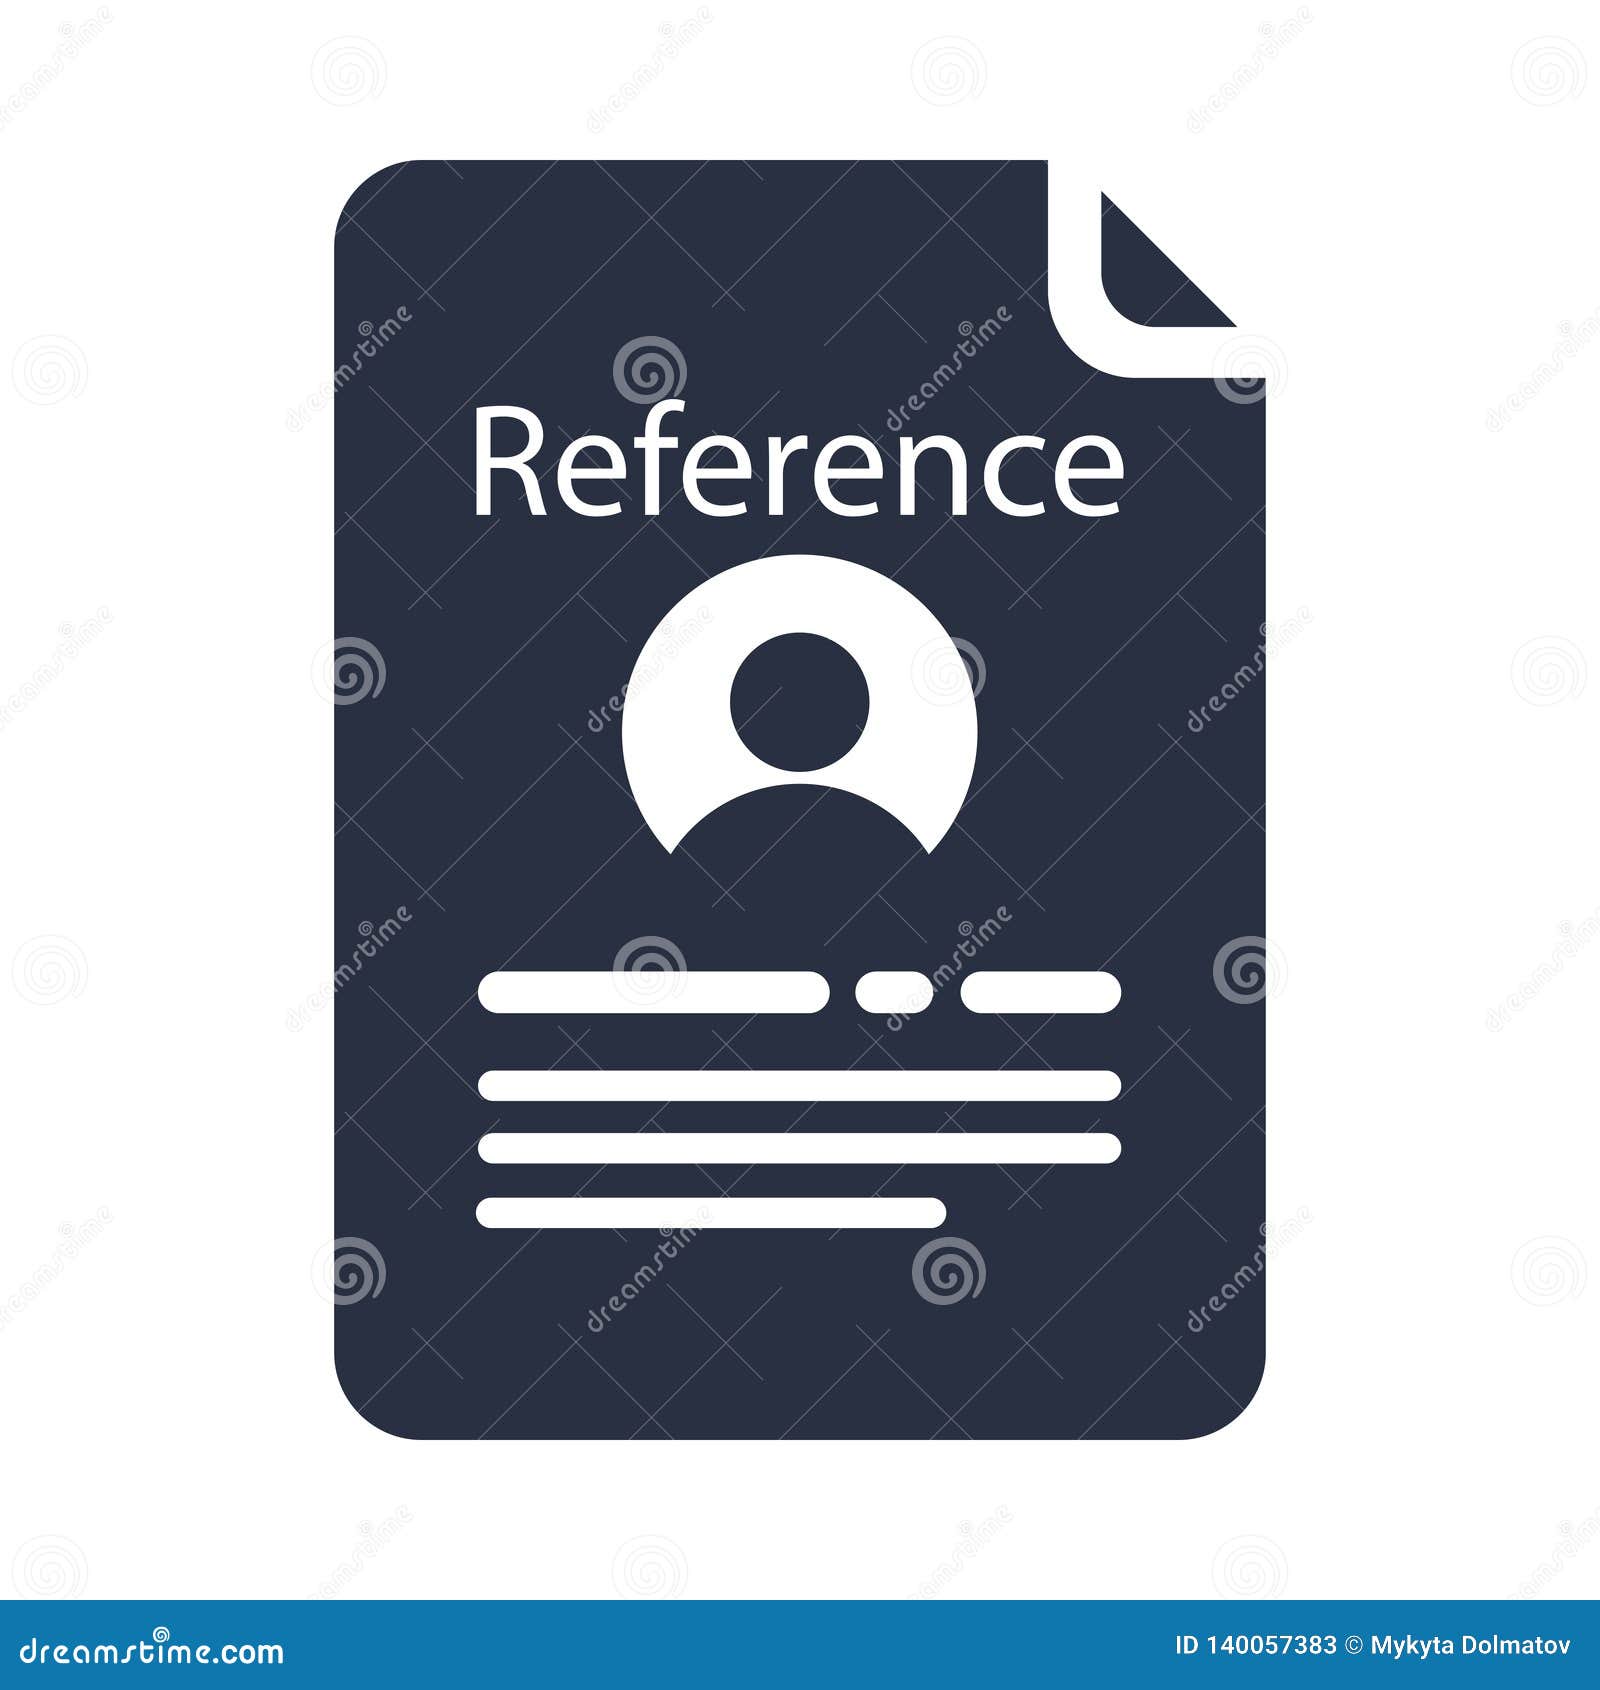 Reference Letter For Job from thumbs.dreamstime.com